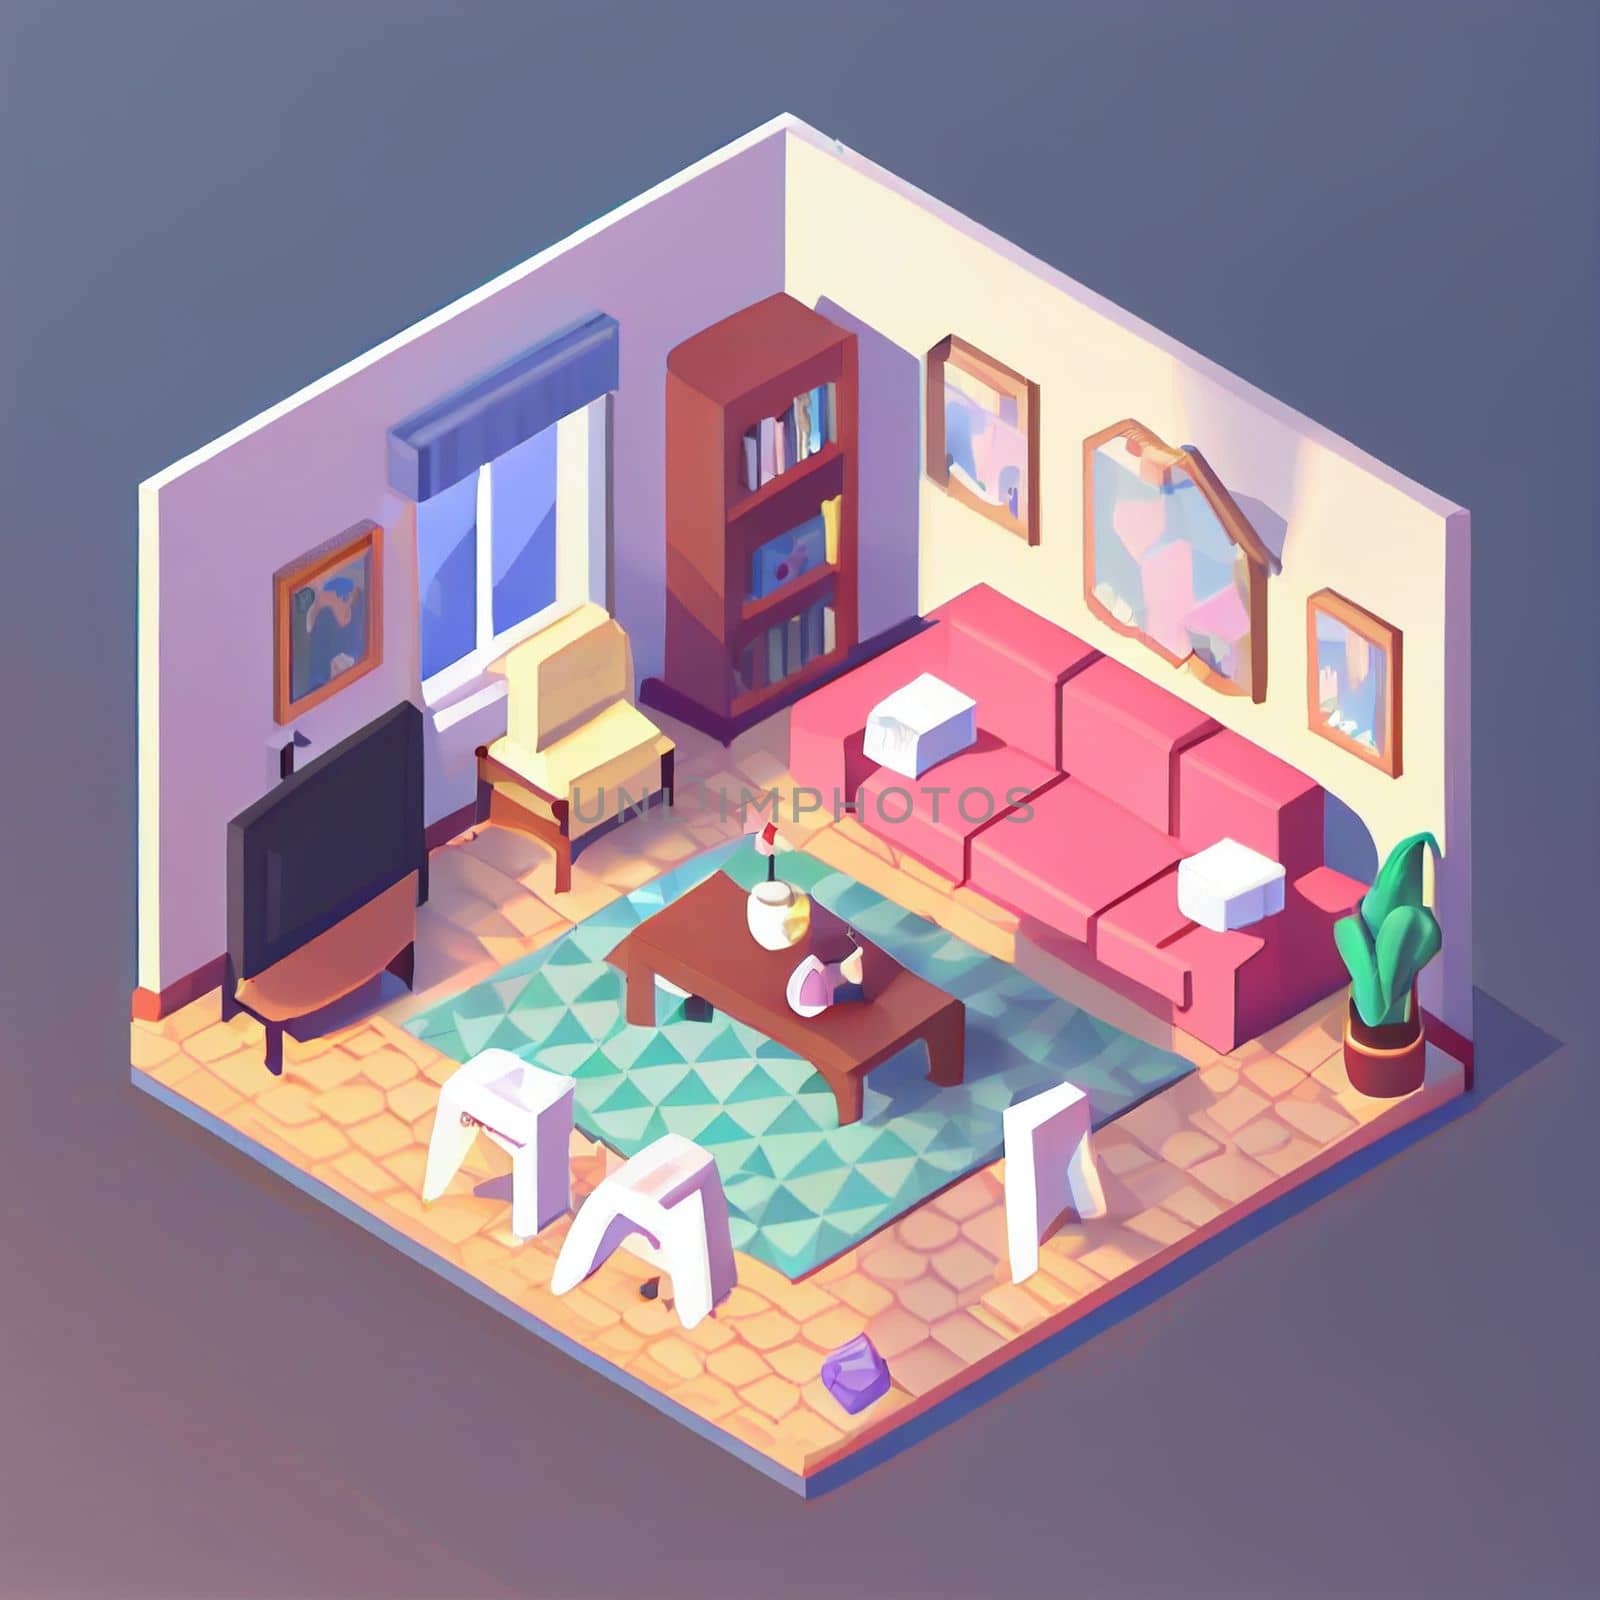 3d illustration isometric interior cute design. Living room includes sofa, coffee table, windows, curtain, clock, frame and other furniture. A lot of voluminous objects and details.